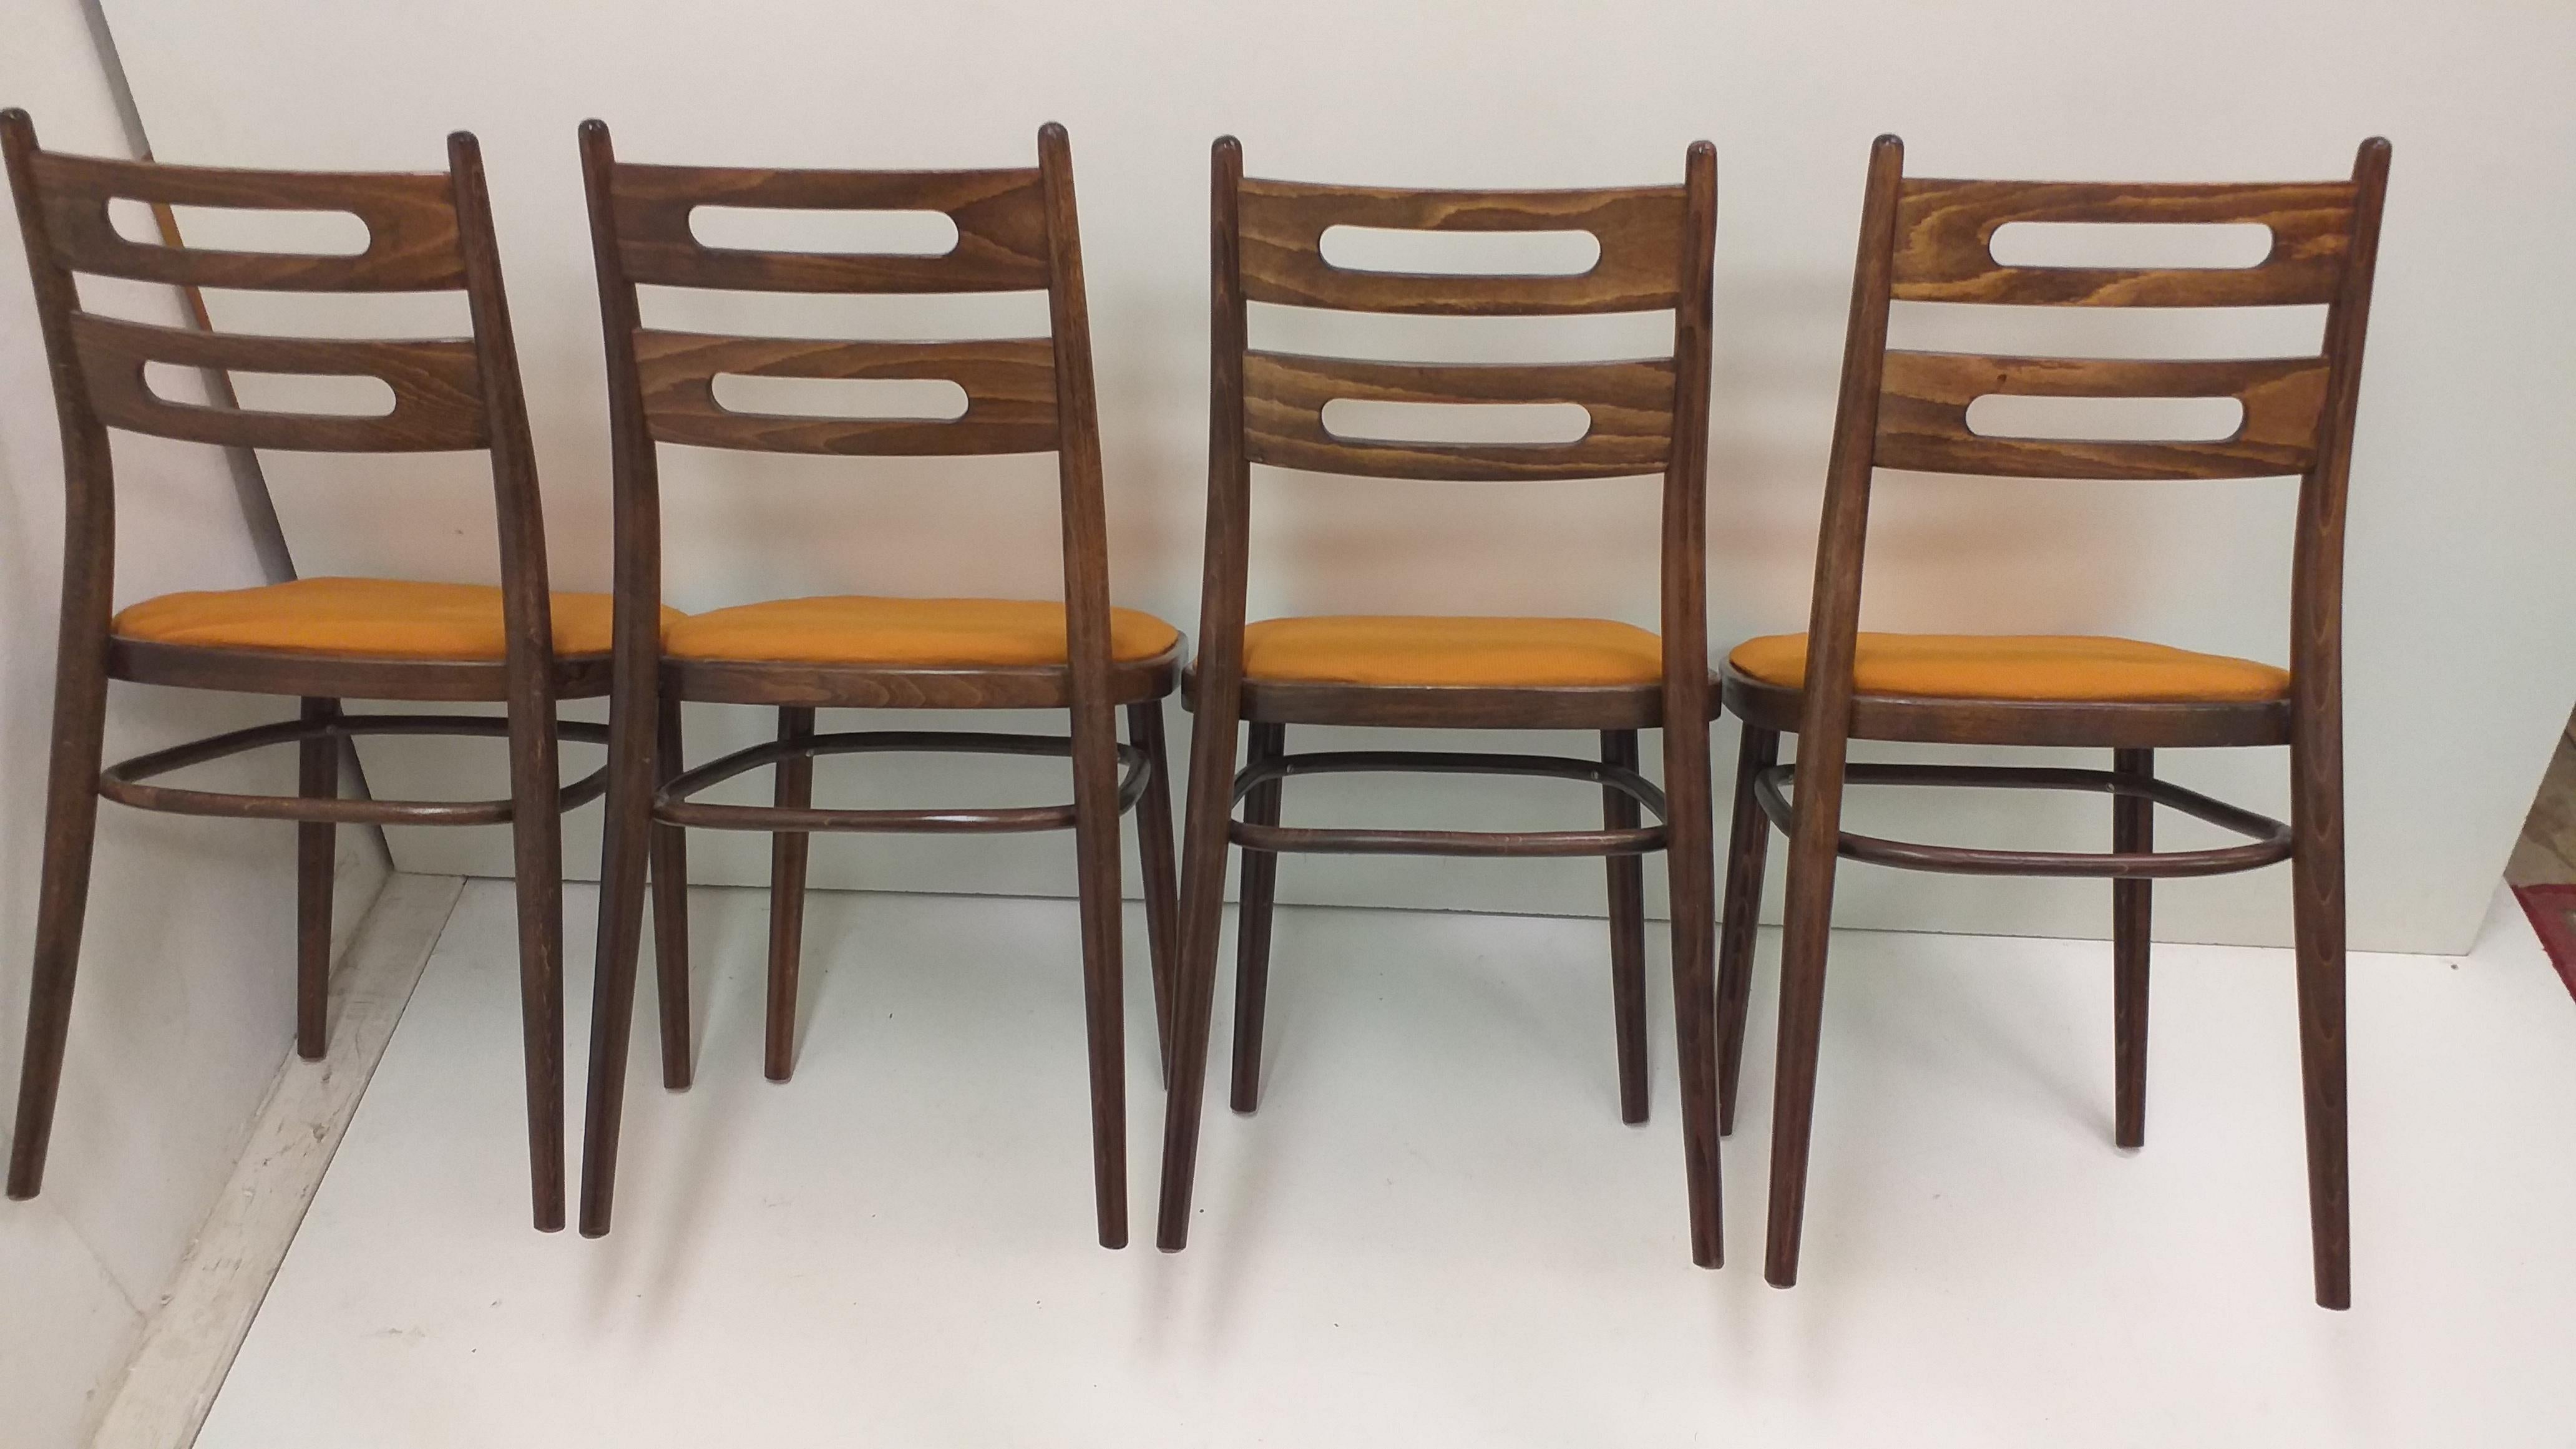 1960 4 Pieces of Ton Chairs, Czechoslovakia For Sale 3